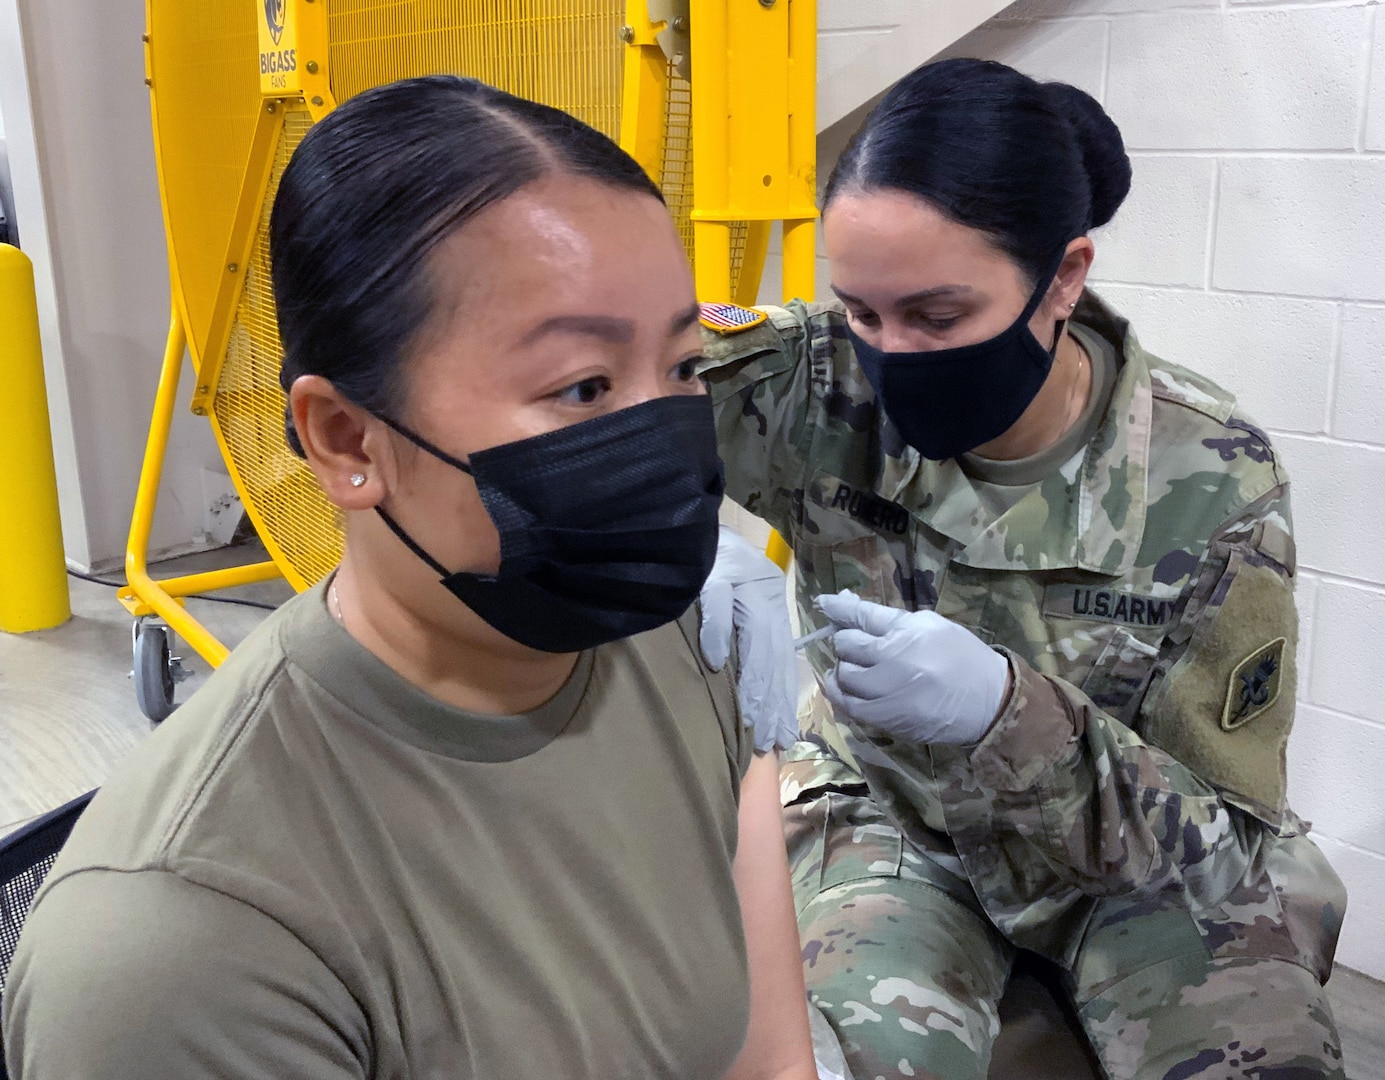 Spc. Hannah Le, 68K medical laboratory specialist in training at the U.S. Army Medical Center of Excellence, or MEDCoE, is administered the first dose of the Pfizer BioNTech COVID-19 vaccine by Sgt. 1st Class Victoria Romero, MEDCoE 68W Combat Medic cadre augmenting staff at the Brooke Army Medical Center’s Joint Base San Antonio-Fort Sam Houston Vaccine site April 15.